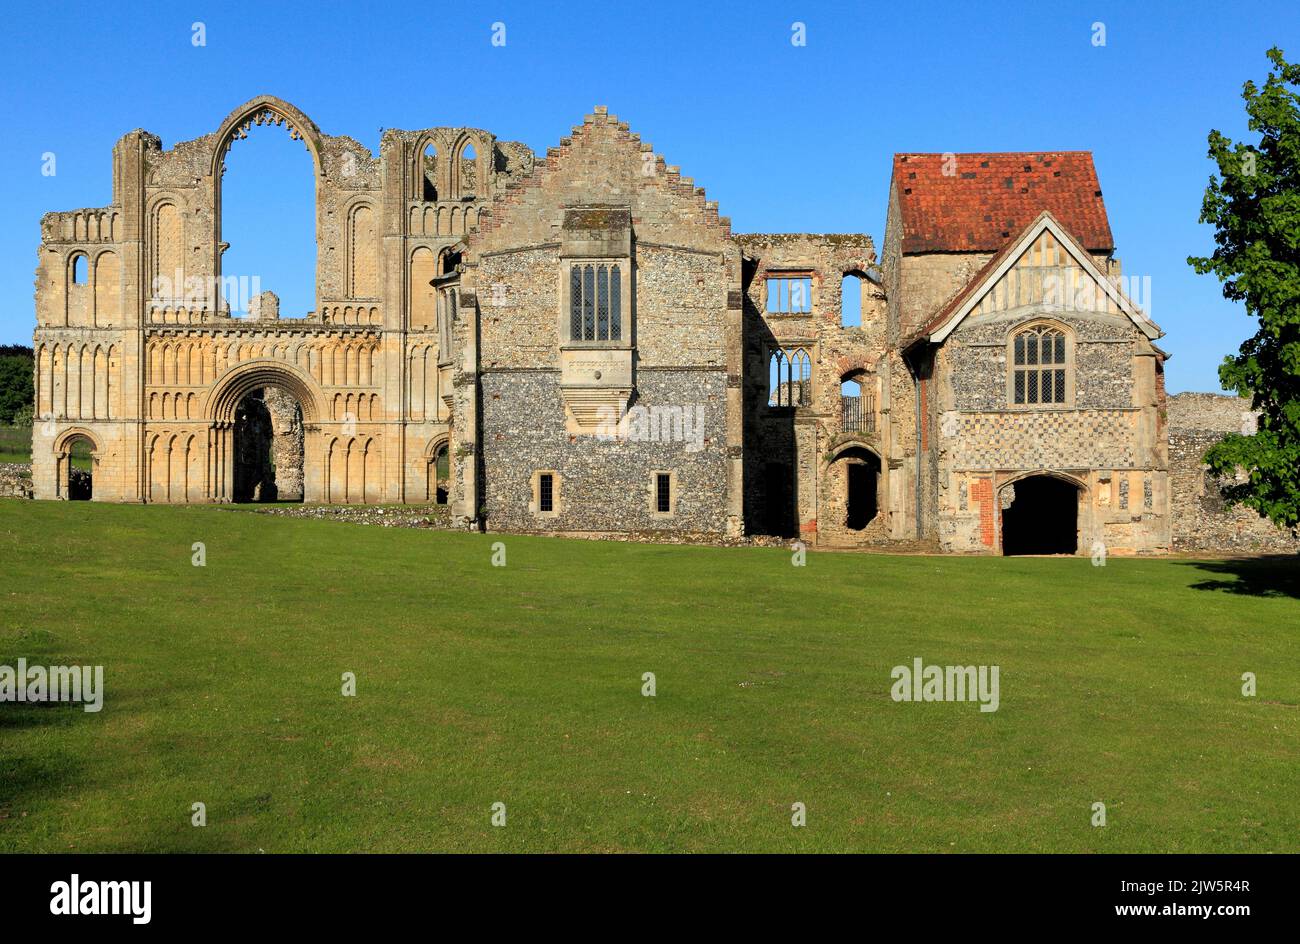 Castle Acre Priory, Norfolk, west front of priory church, and Priors Lodging, English priories, ruins, ruined, medieval, architecture Stock Photo